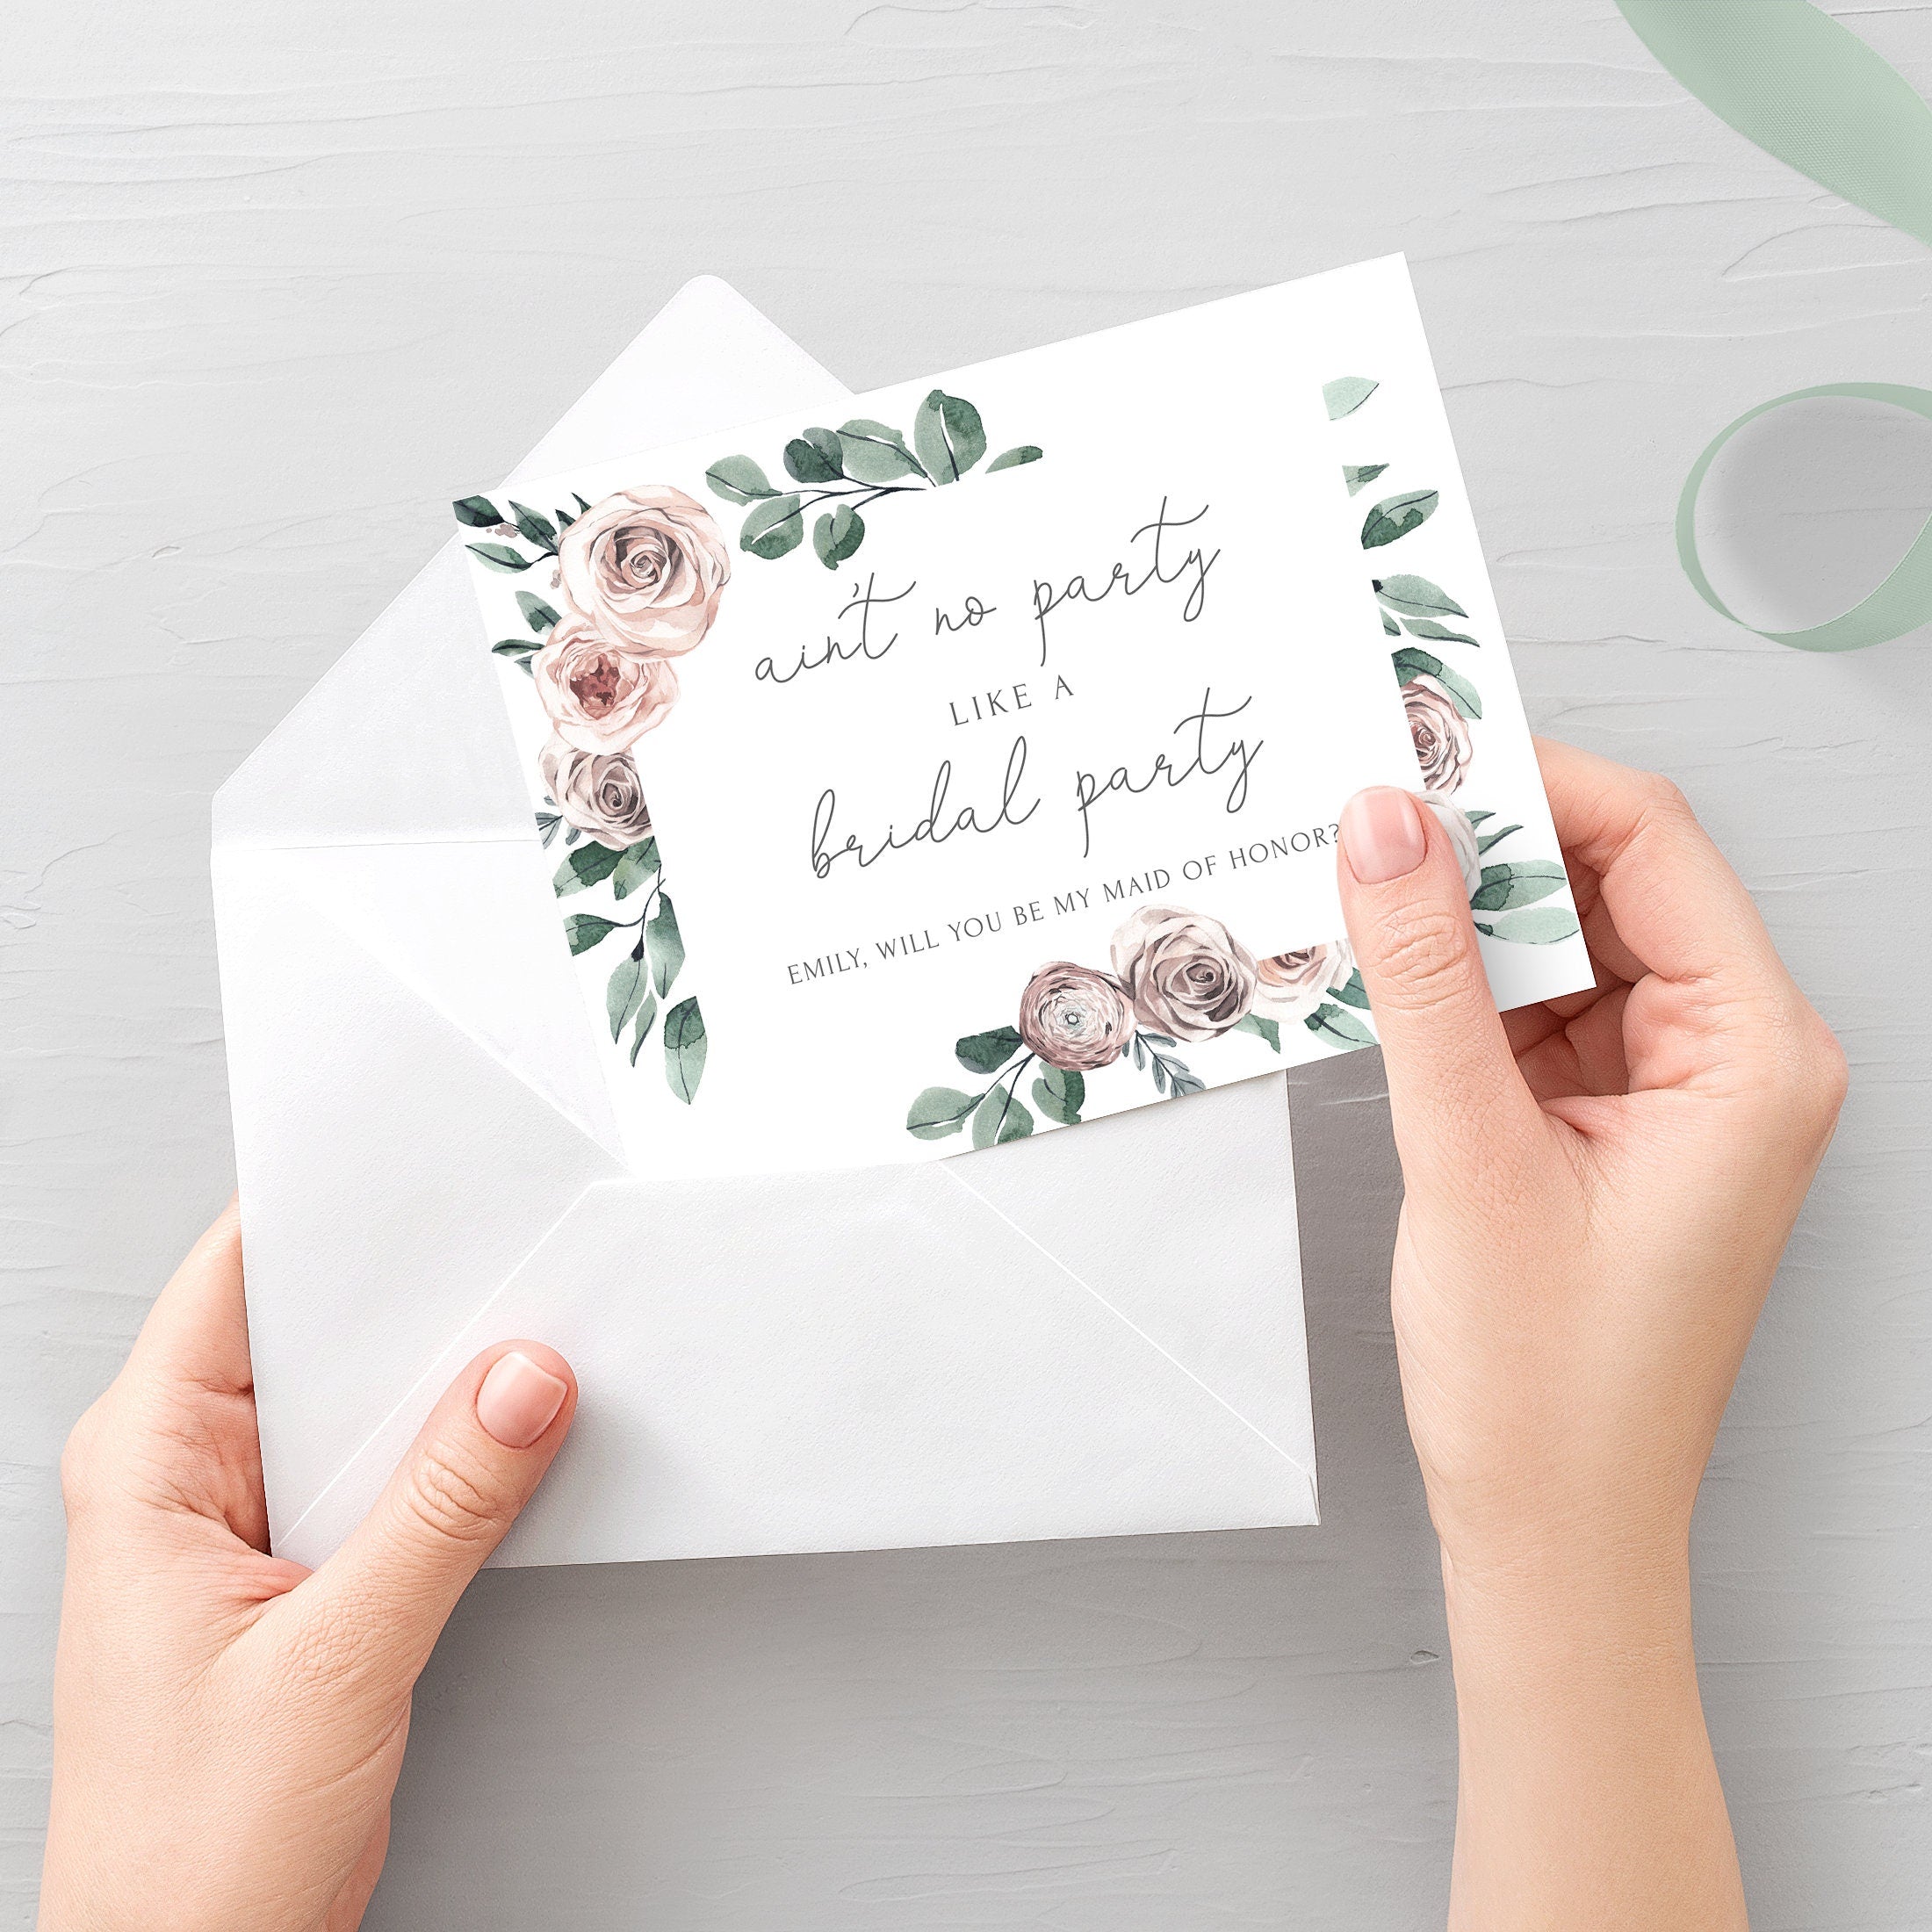 Printable Maid Of Honor Proposal Card Funny, Will You Be My Maid Of Honor Ask Card, Ain't No Party Personalized Card, DIGITAL A2 - BR100